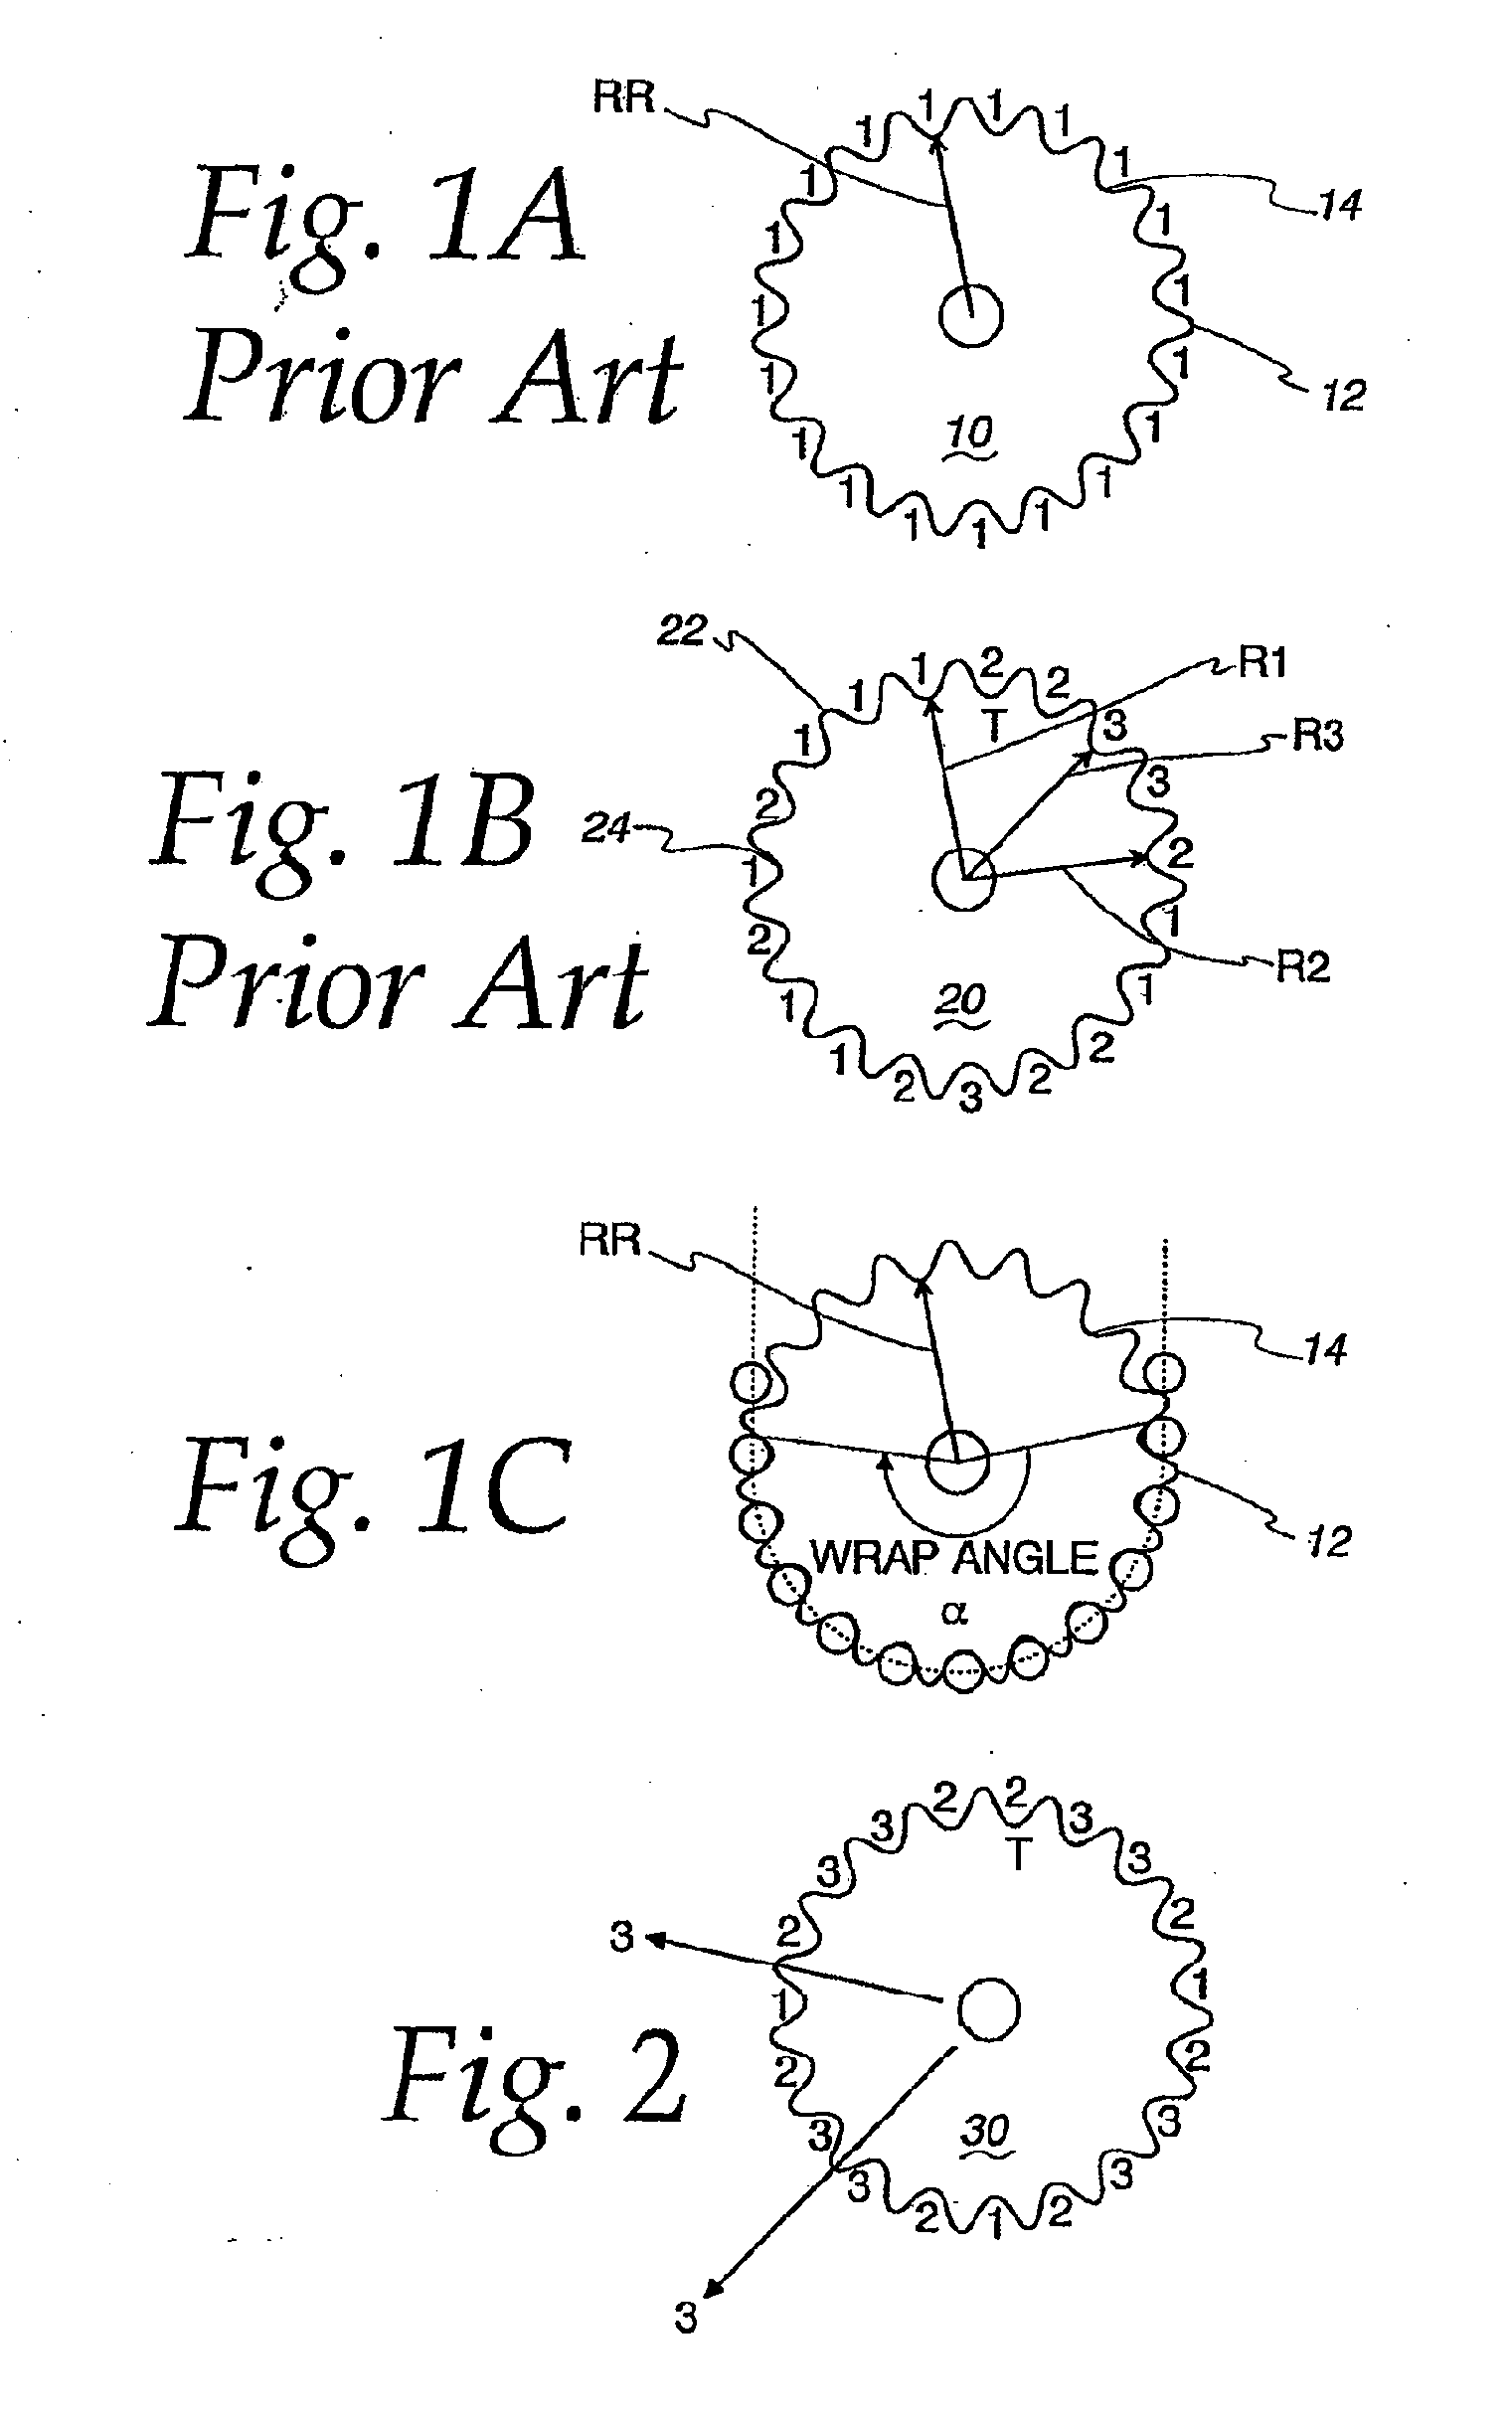 Multiple Tension Reducing Sprockets in a Chain and Sprocket System